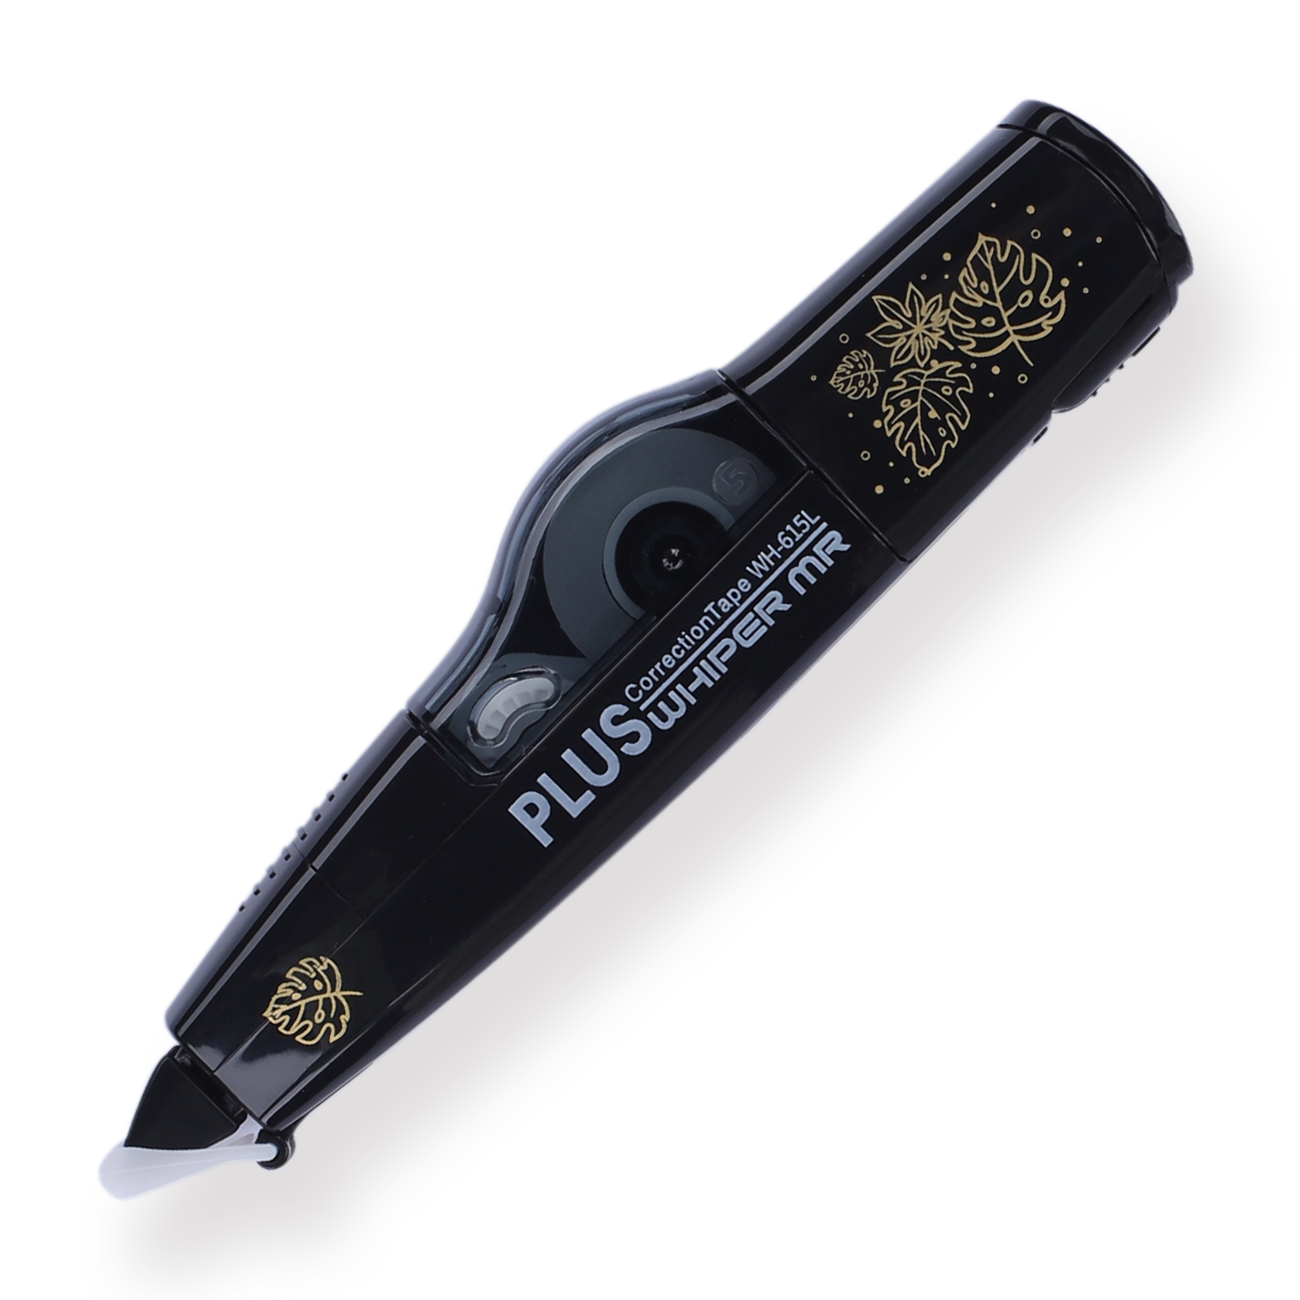 Plus Whiper Mr Limited Edition Correction Tape - Black Gold Series - Leaves - Stationery Pal